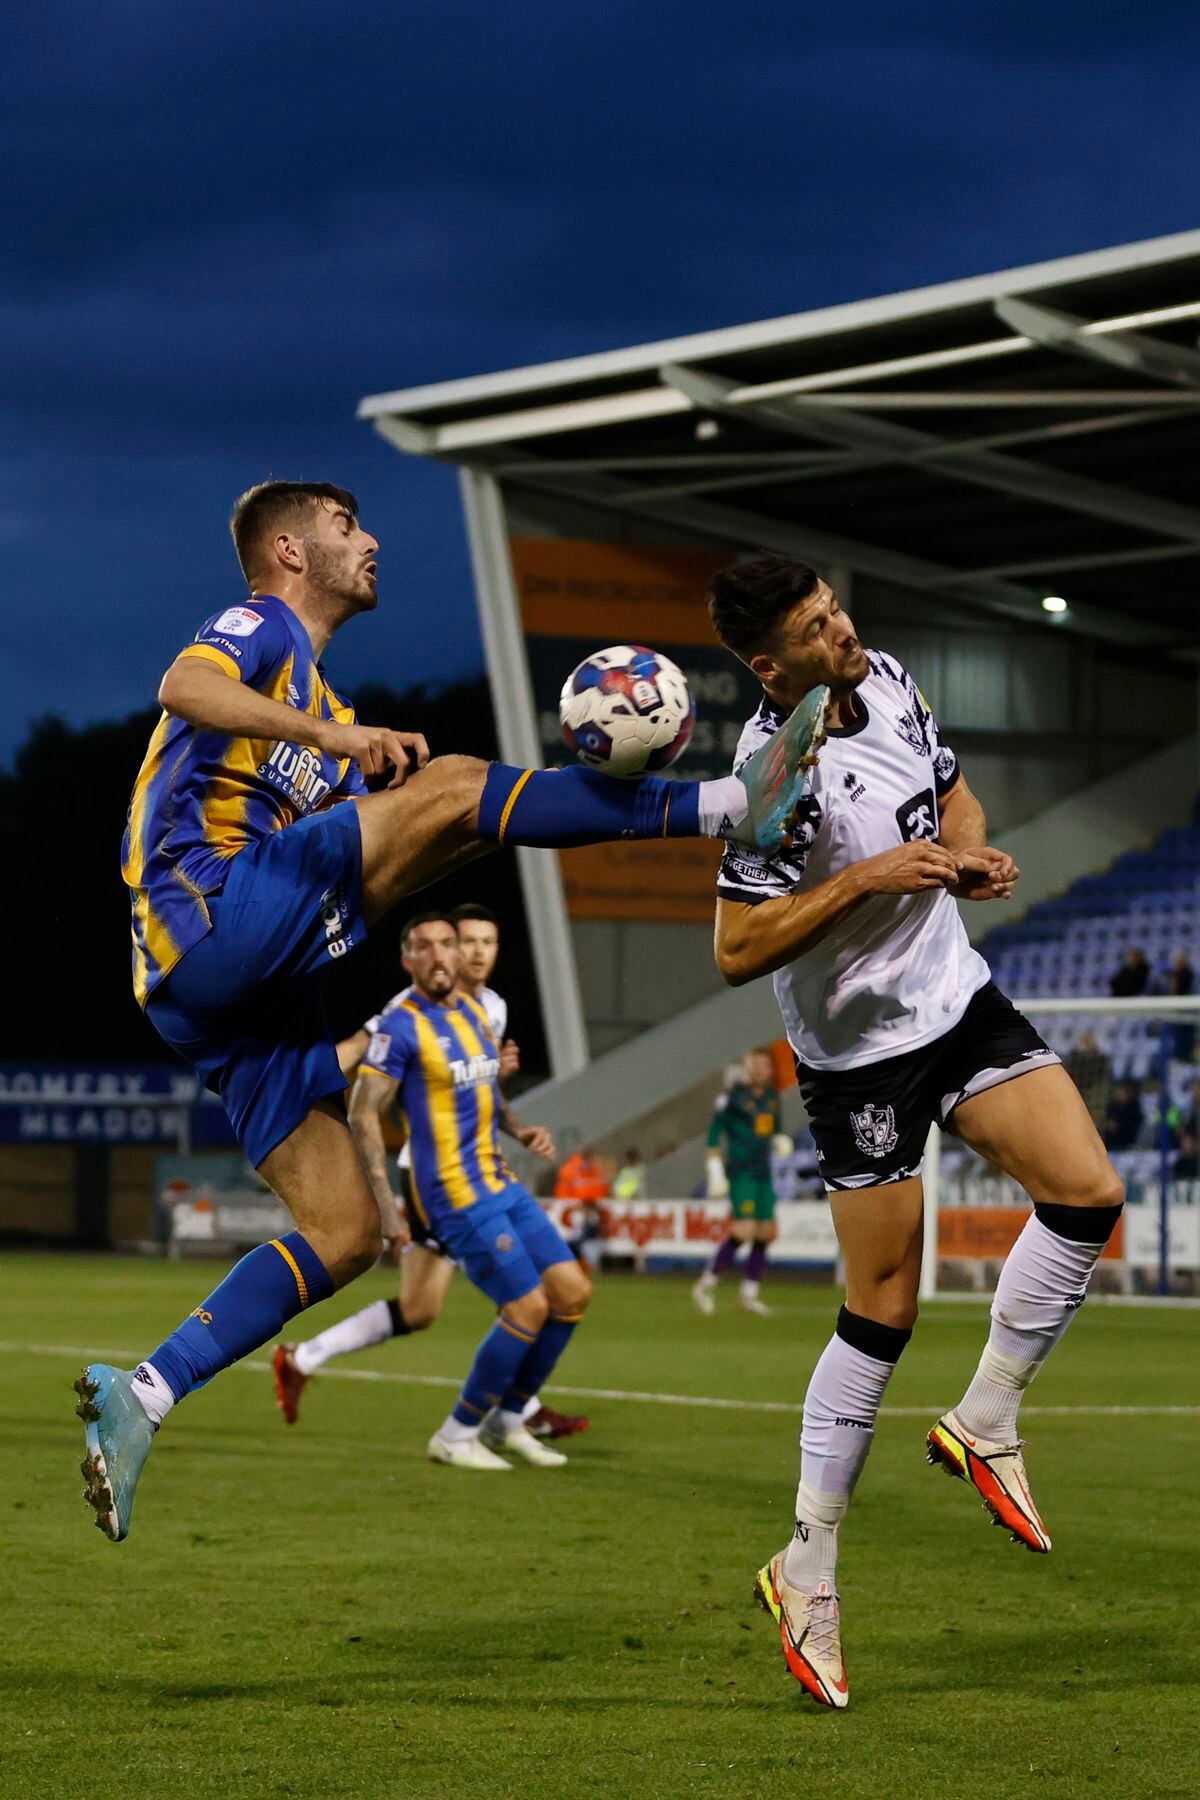 Tom Bloxham of Shrewsbury Town and Connor Hall of Port Vale (AMA)